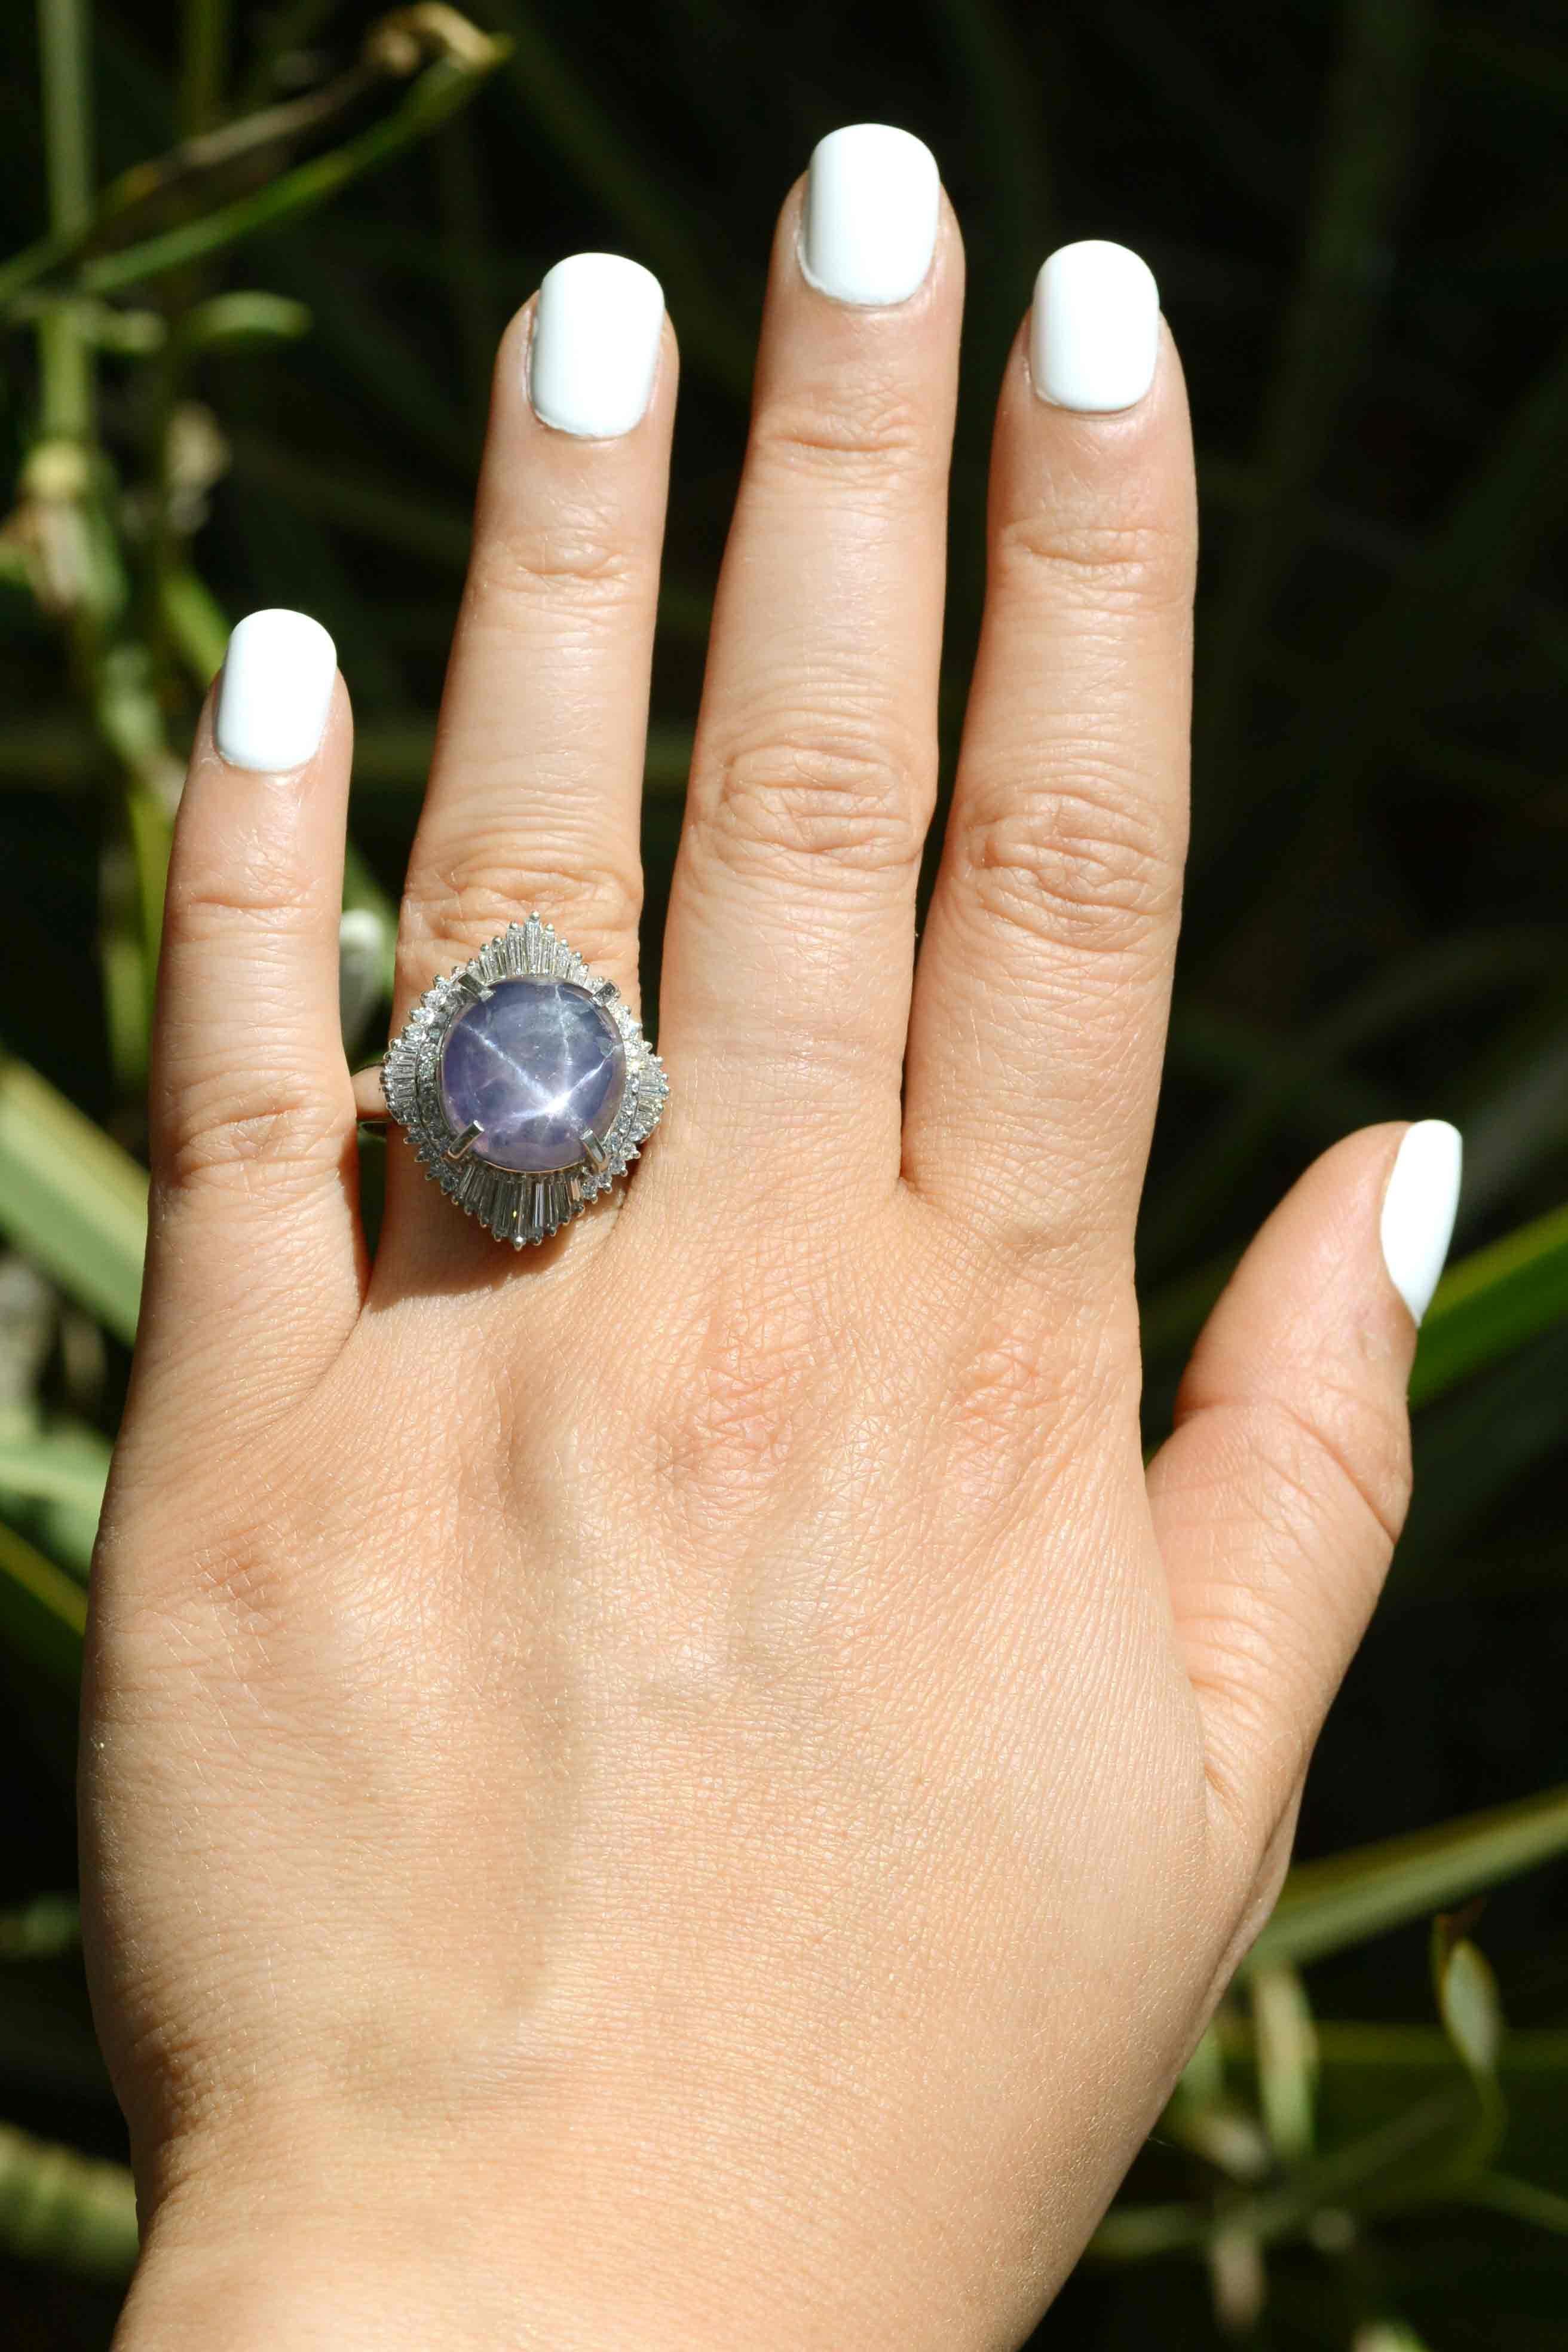 The Jacksonville star sapphire and diamond ballerina ring. Talk about a showstopper! This fabulous dome cocktail ring showcases an absolute stunner of a gemstone; a nearly 20 carat natural purple sapphire with a distinct and pronounced six pointed